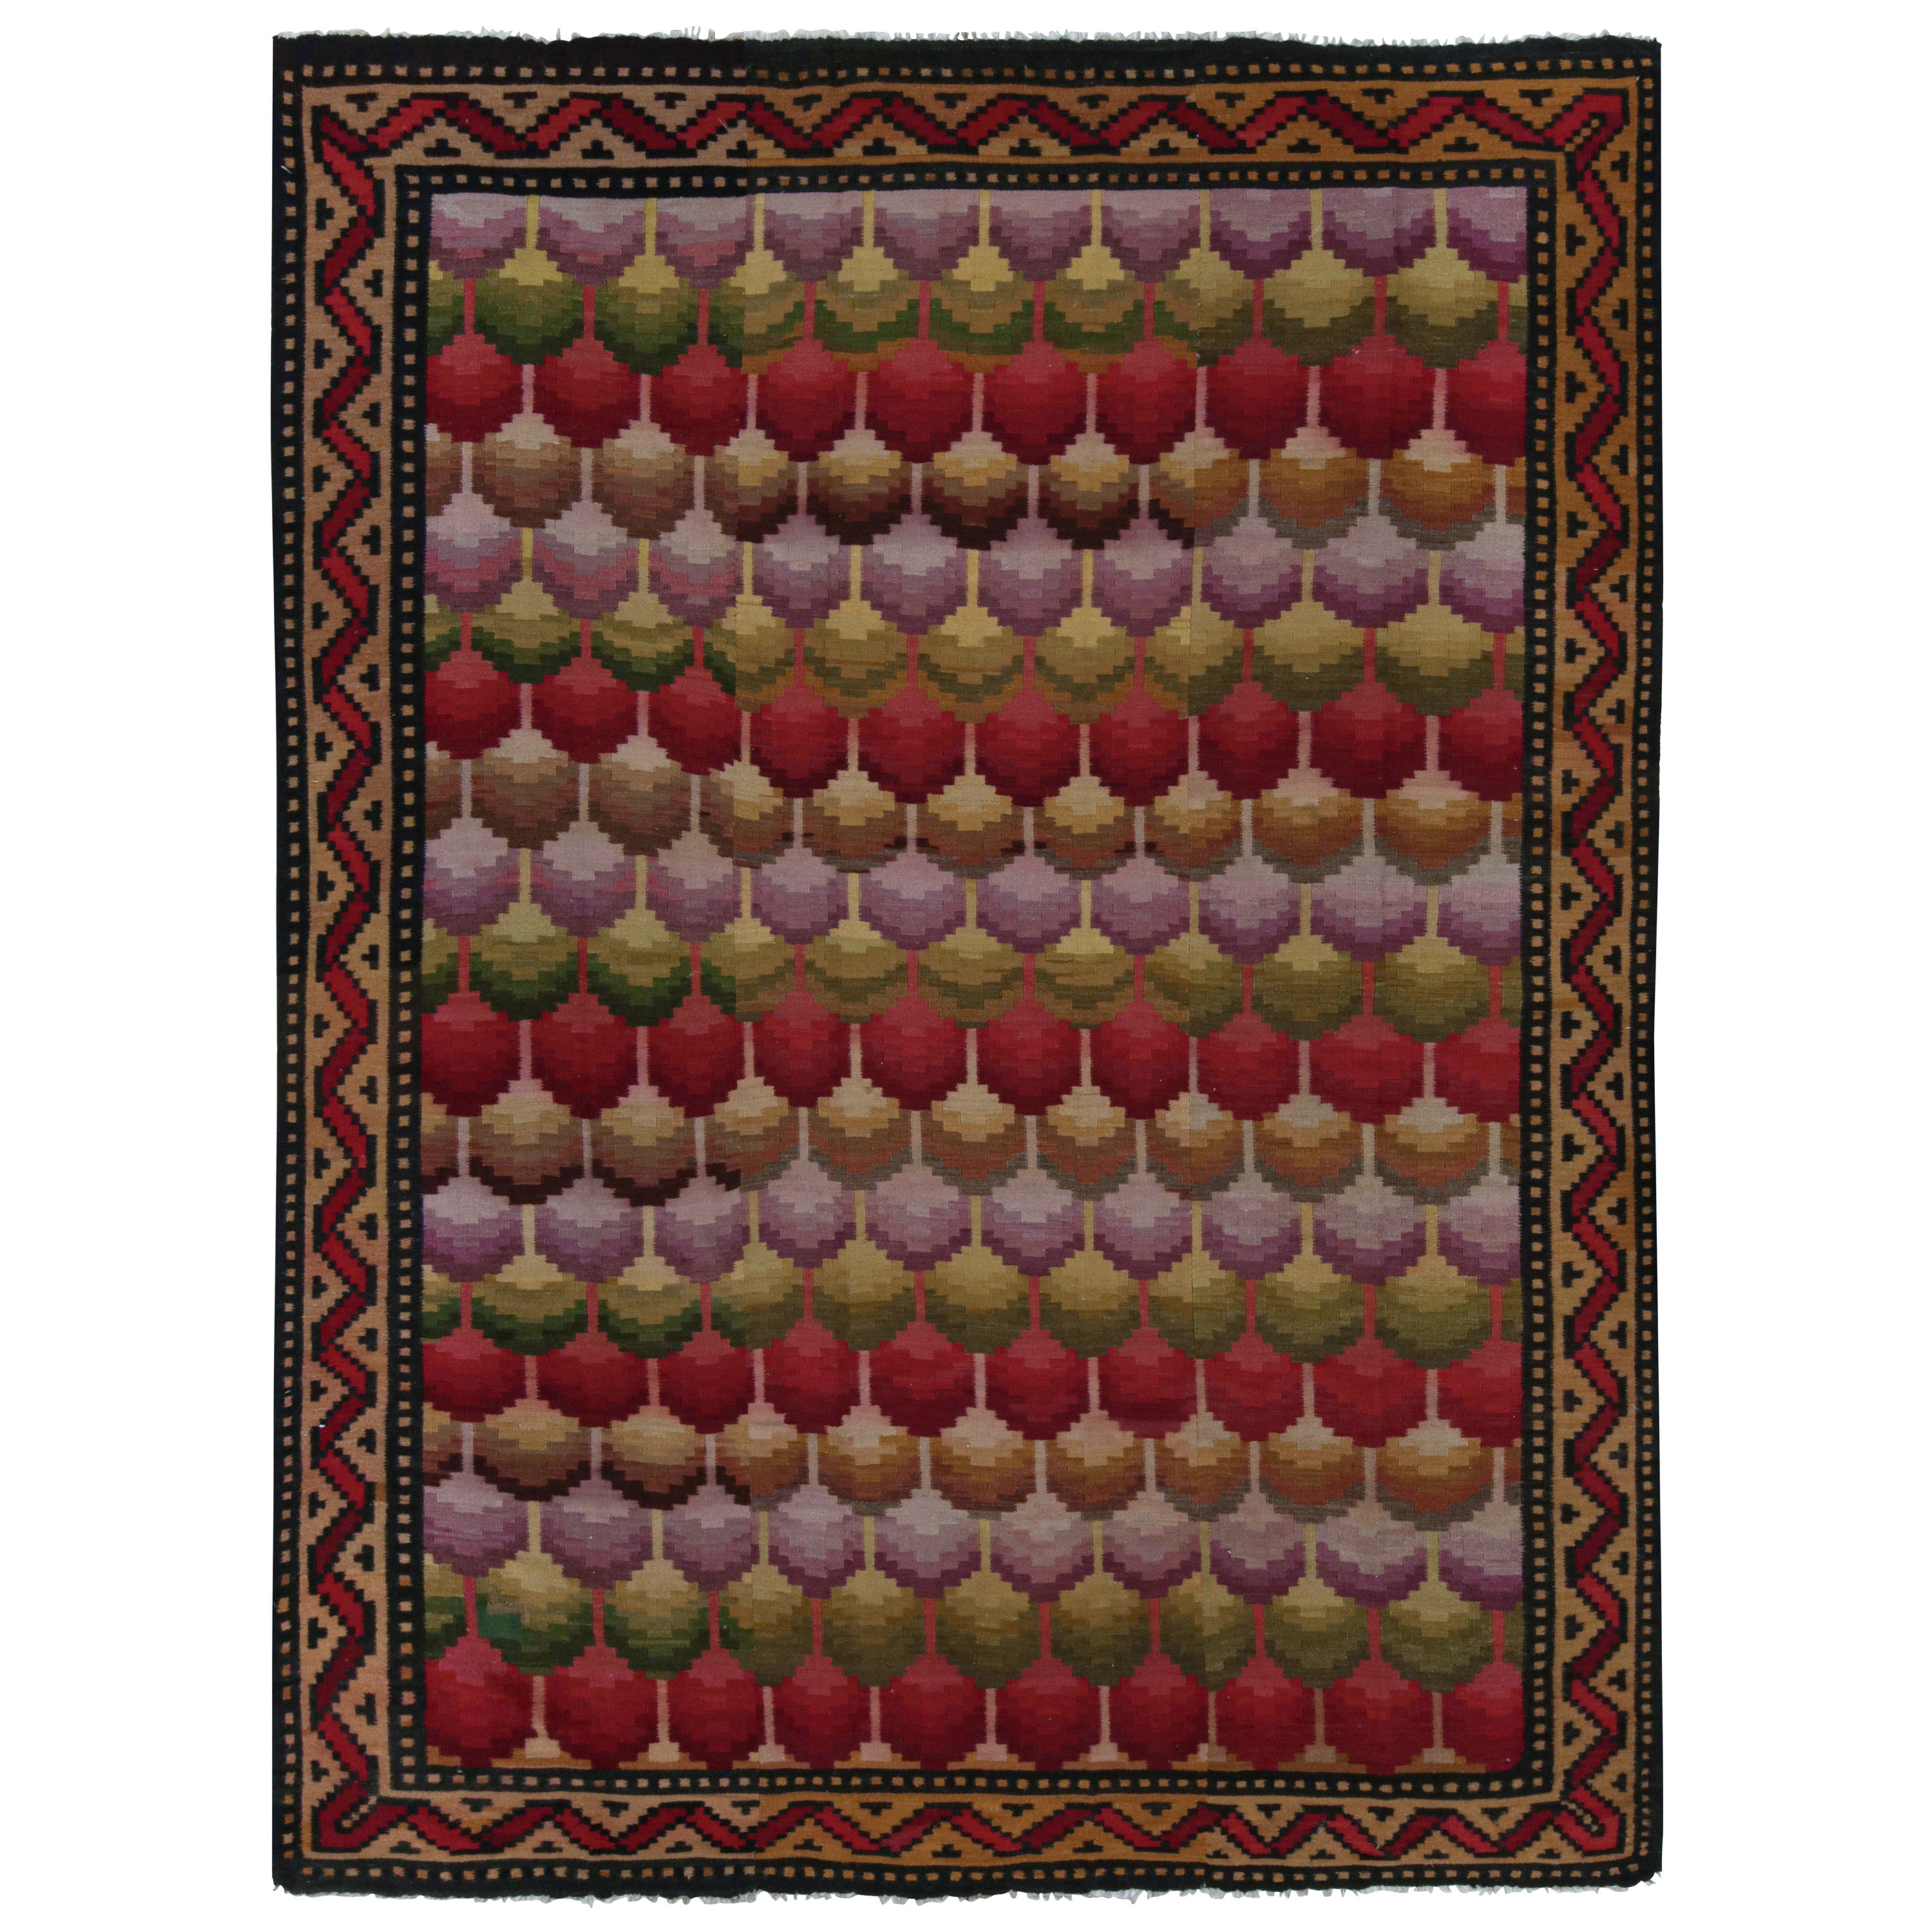 Vintage Turkish Kilim in Red, with Geometric Patterns, from Rug & Kilim For Sale